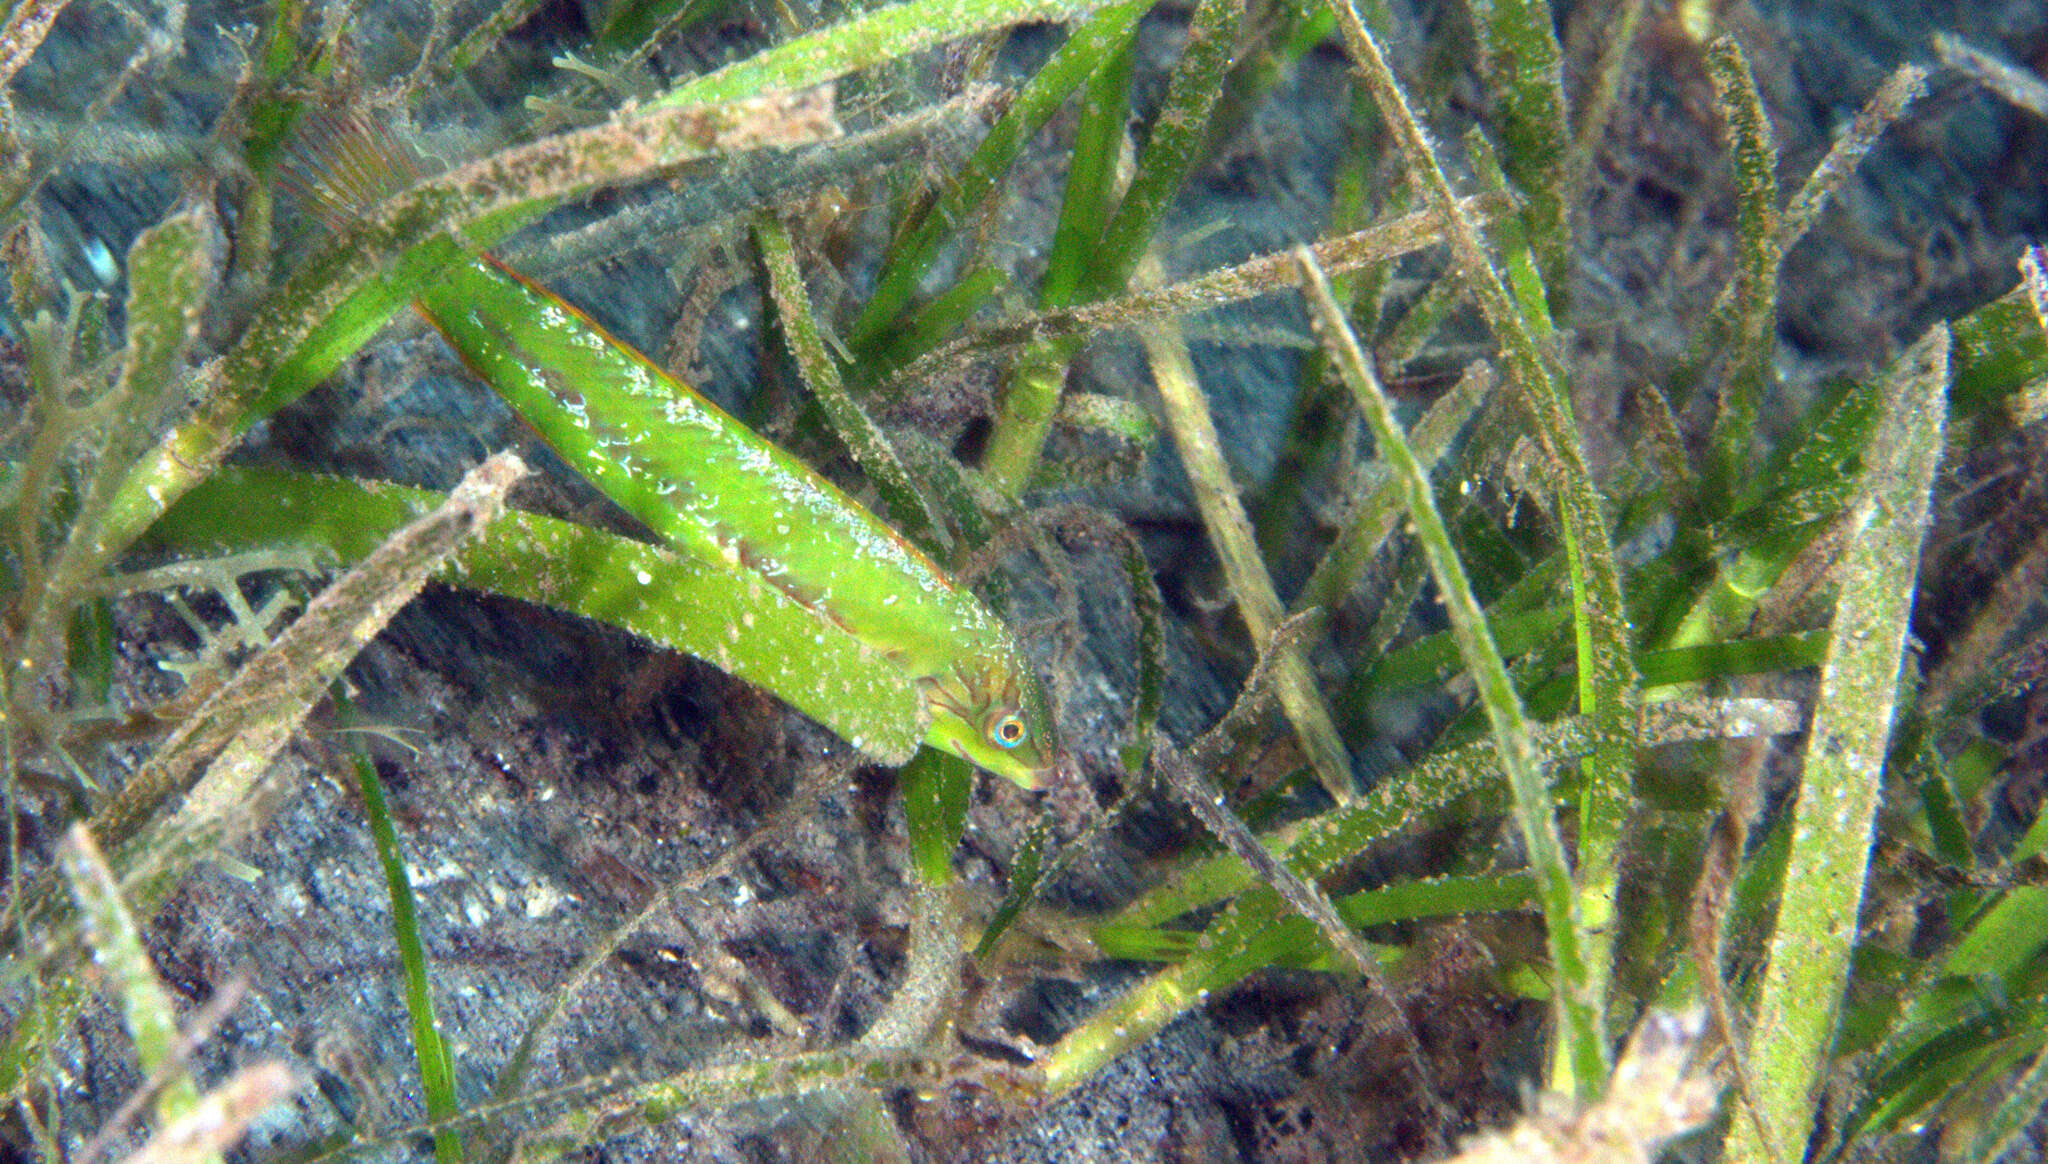 Image of Novaculoides